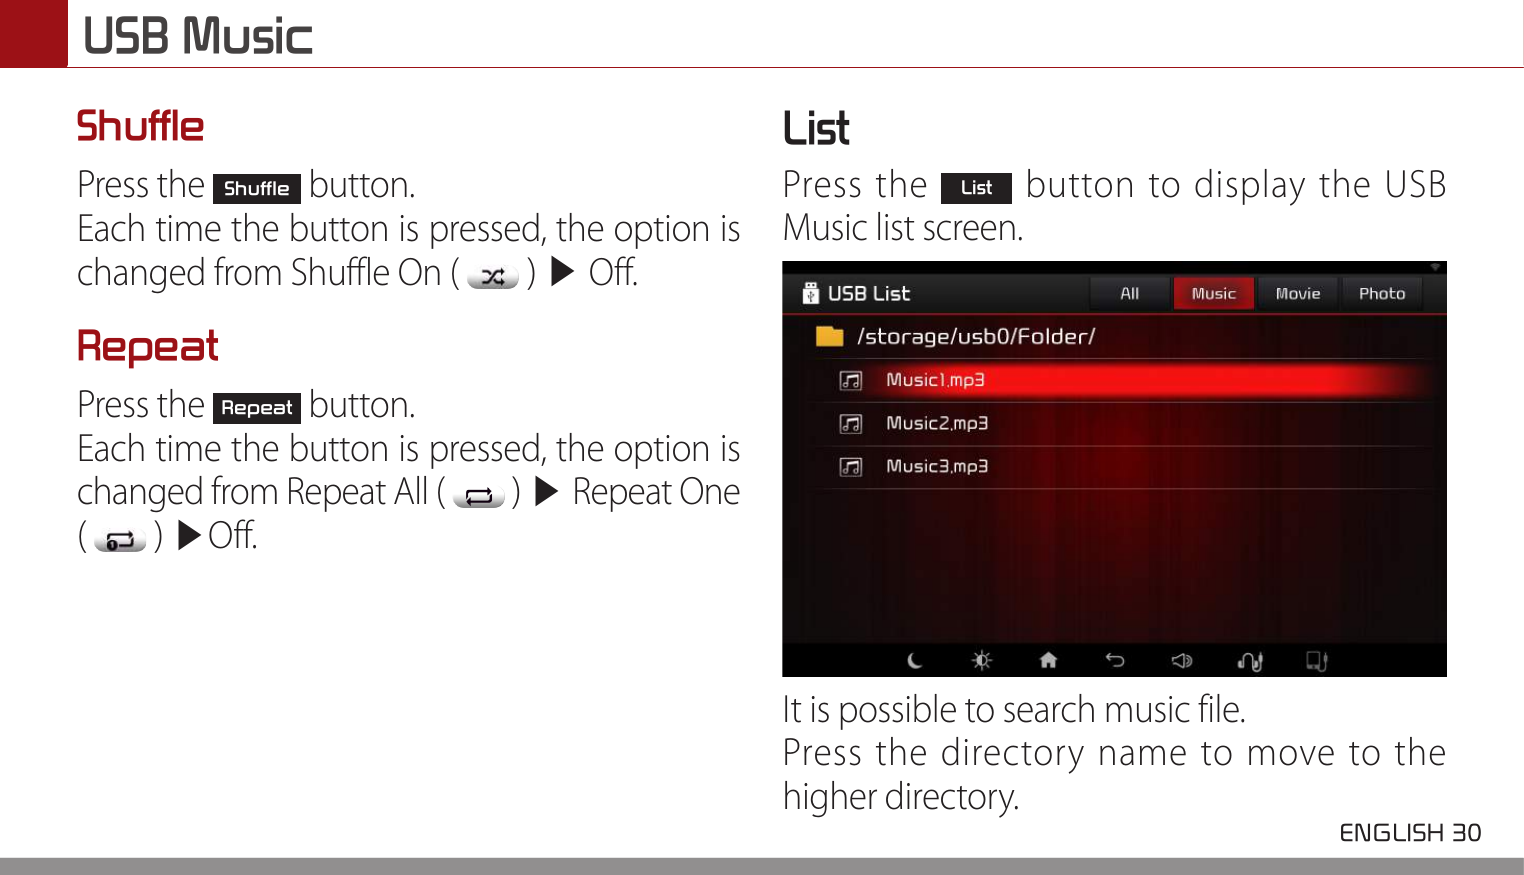 USB Music ENGLISH 30 ShufflePress the Shuffle button.Each time the button is pressed, the option is changed from Shuffle On (   ) ▶ Off.RepeatPress the Repeat button.Each time the button is pressed, the option is changed from Repeat All (   ) ▶ Repeat One  (   ) ▶Off.ListPress the List button to display the USB Music list screen.It is possible to search music file.Press the directory name to move to the higher directory.